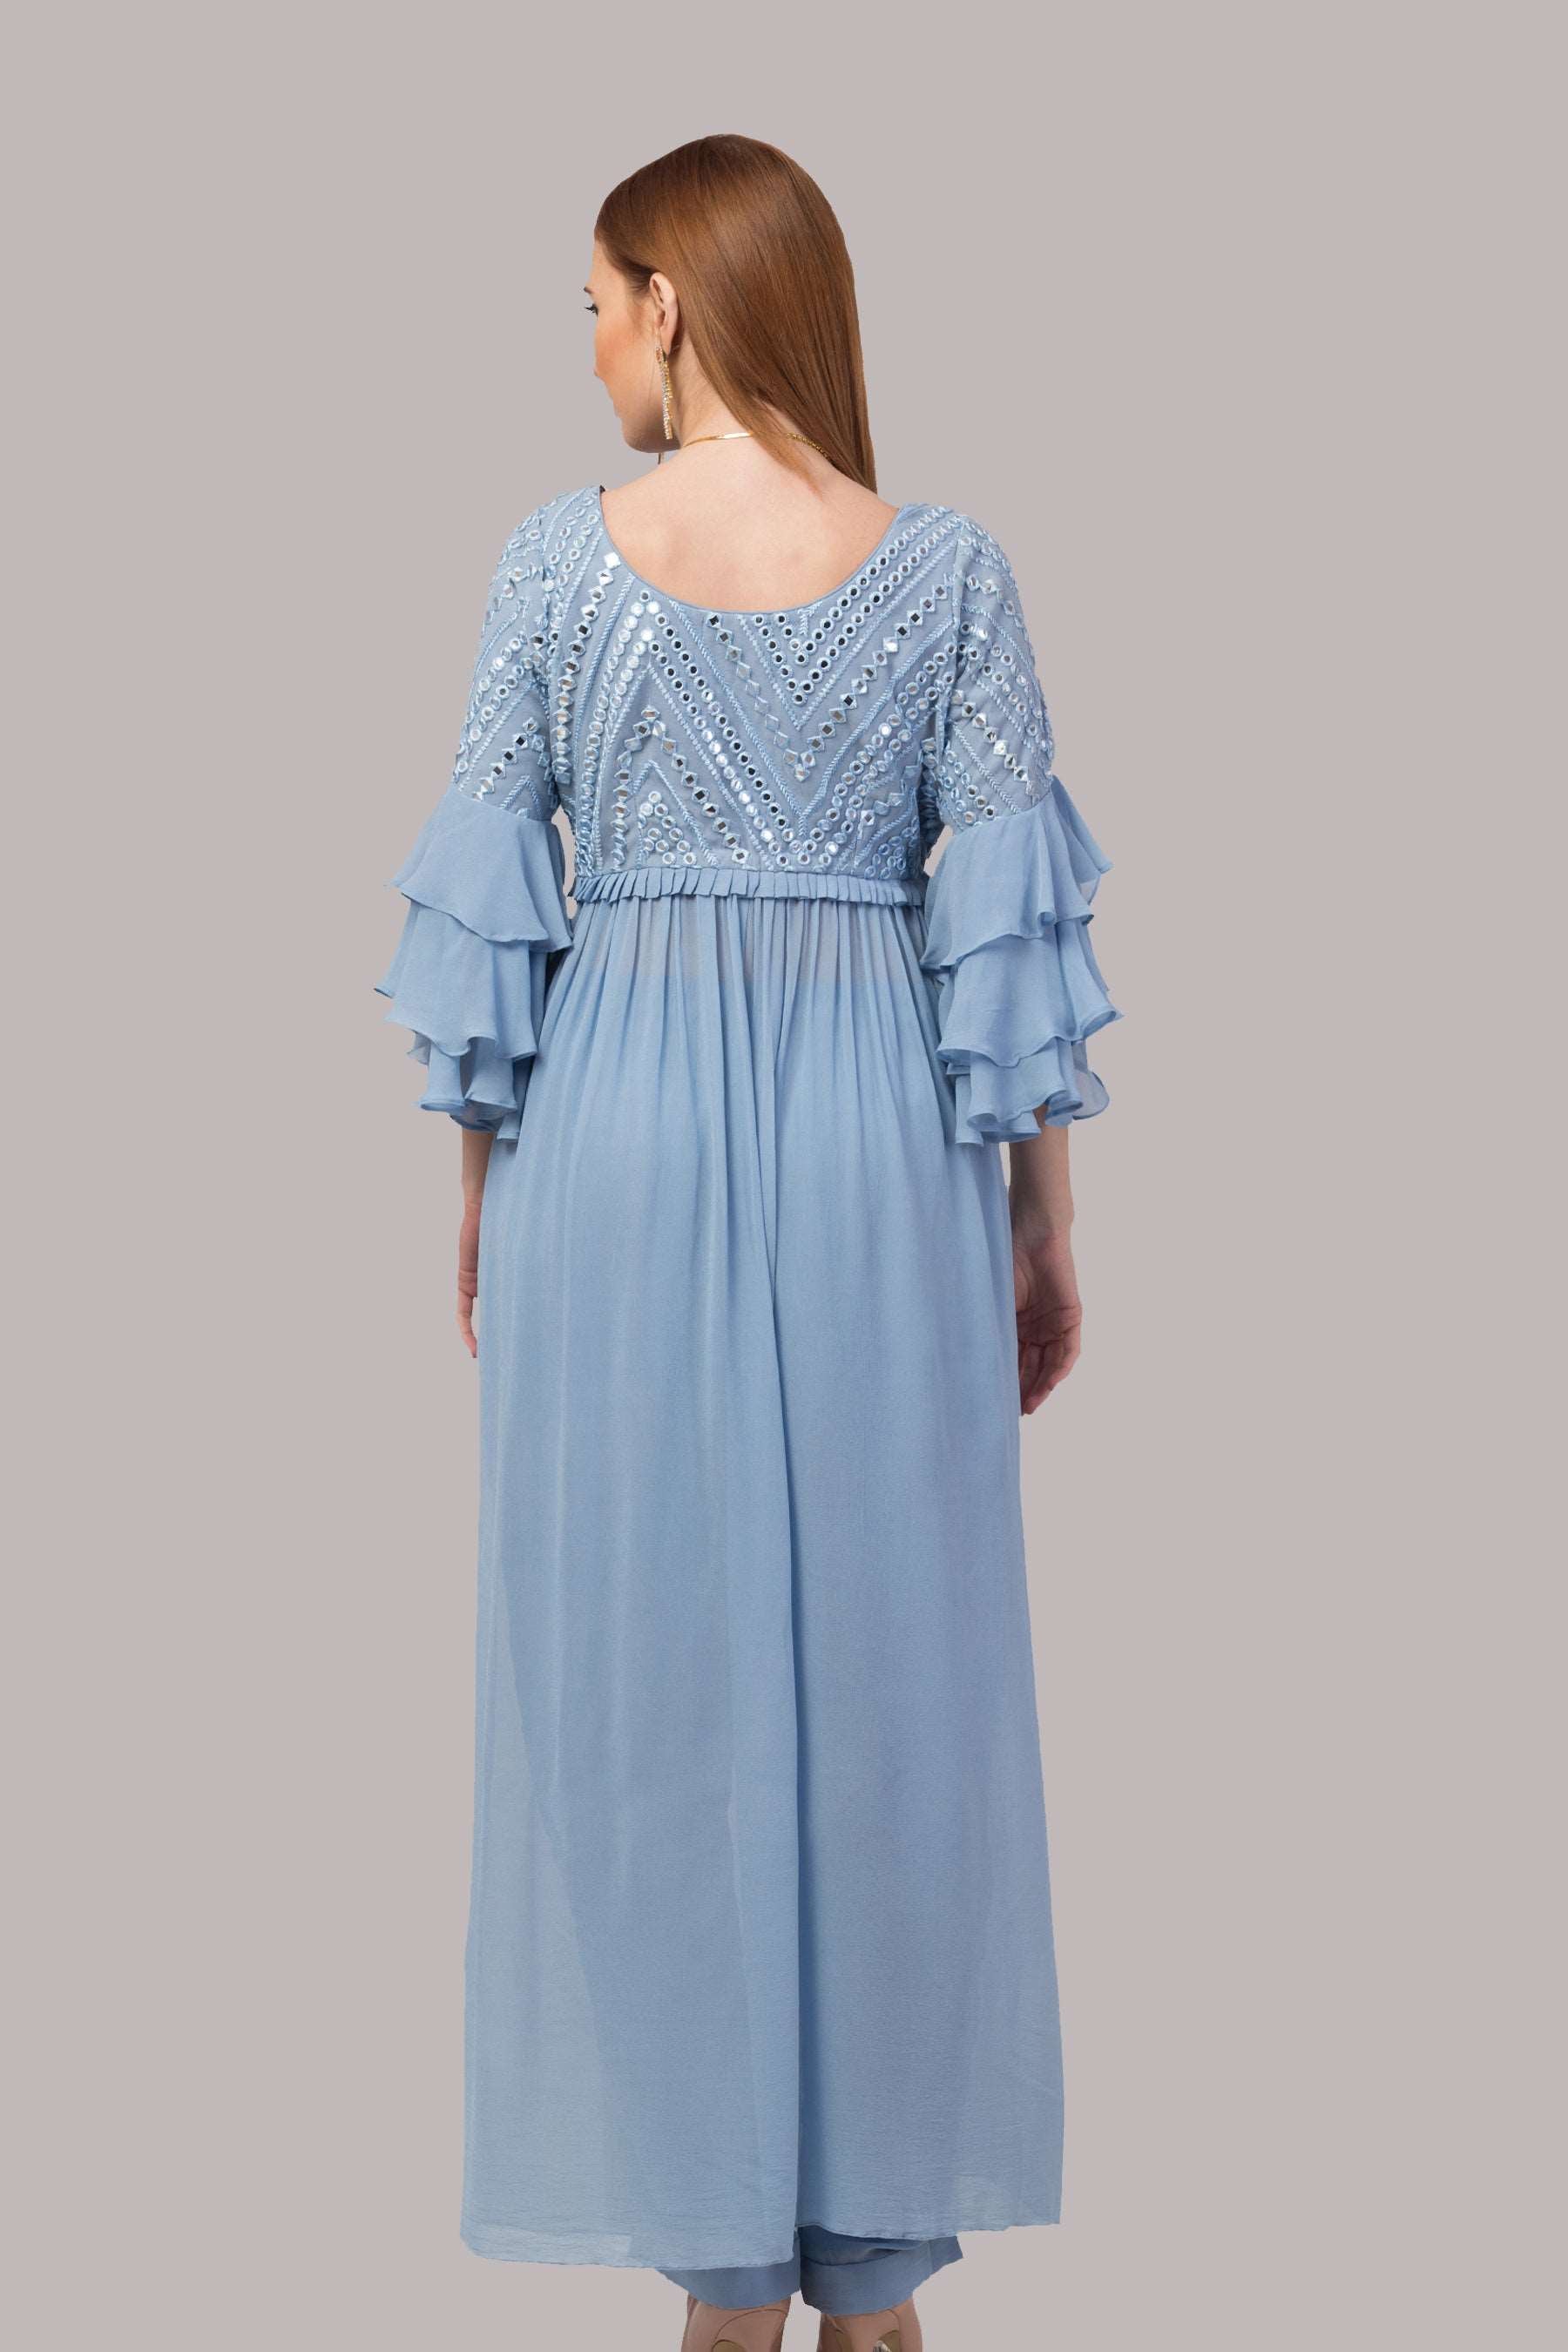 Sky Blue Suit with Three Tier Dramatic Sleeves and pants - wishdrobe